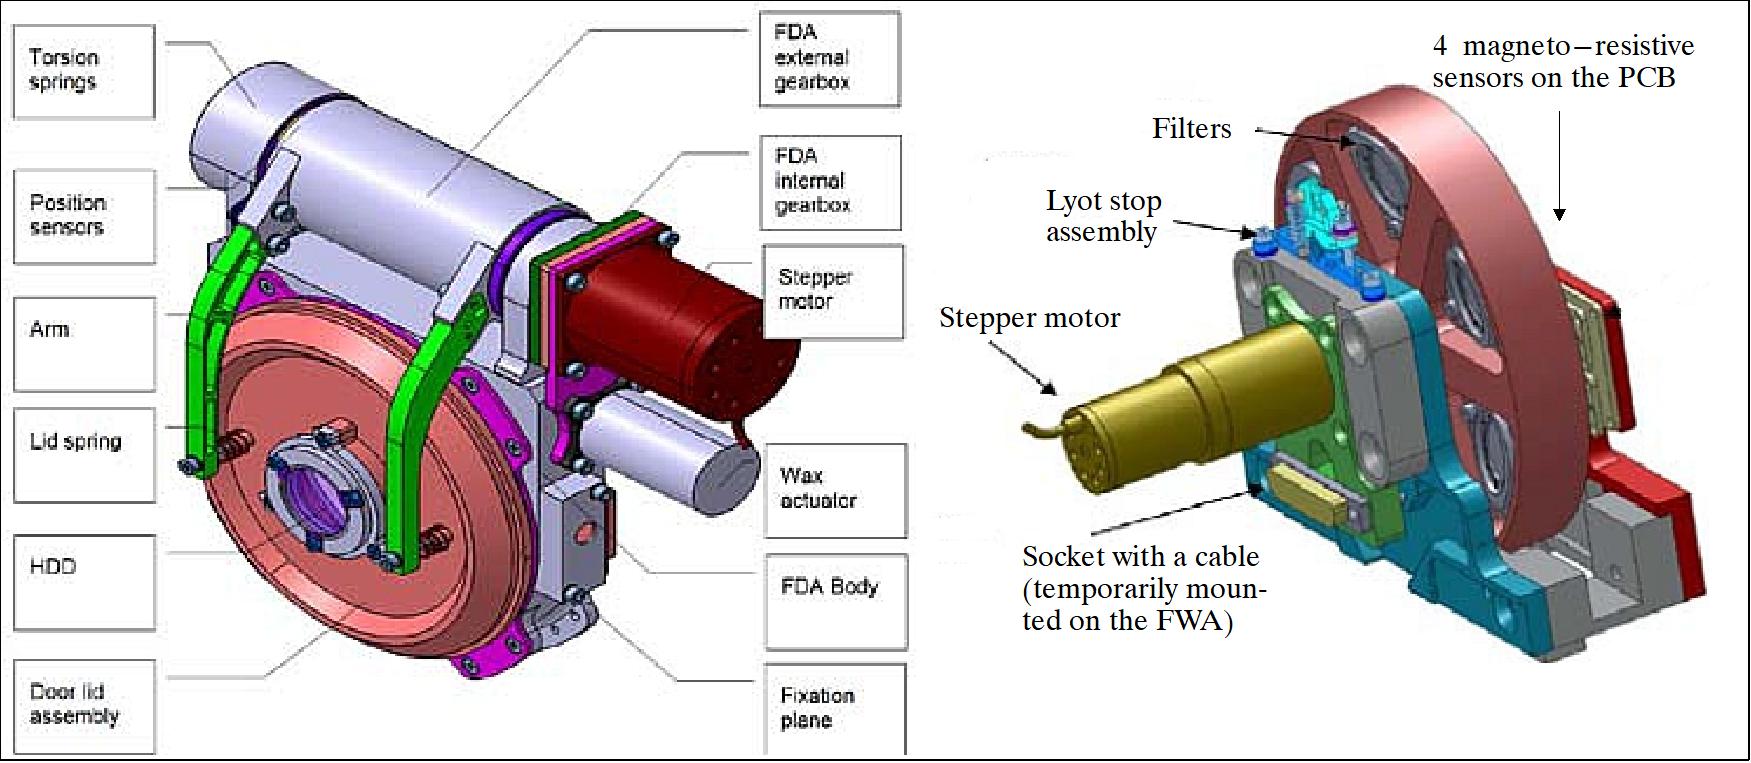 Figure 49: Front Door Assembly (left) and Filter Wheel Assembly (right), image credit: ASPIICS consortium